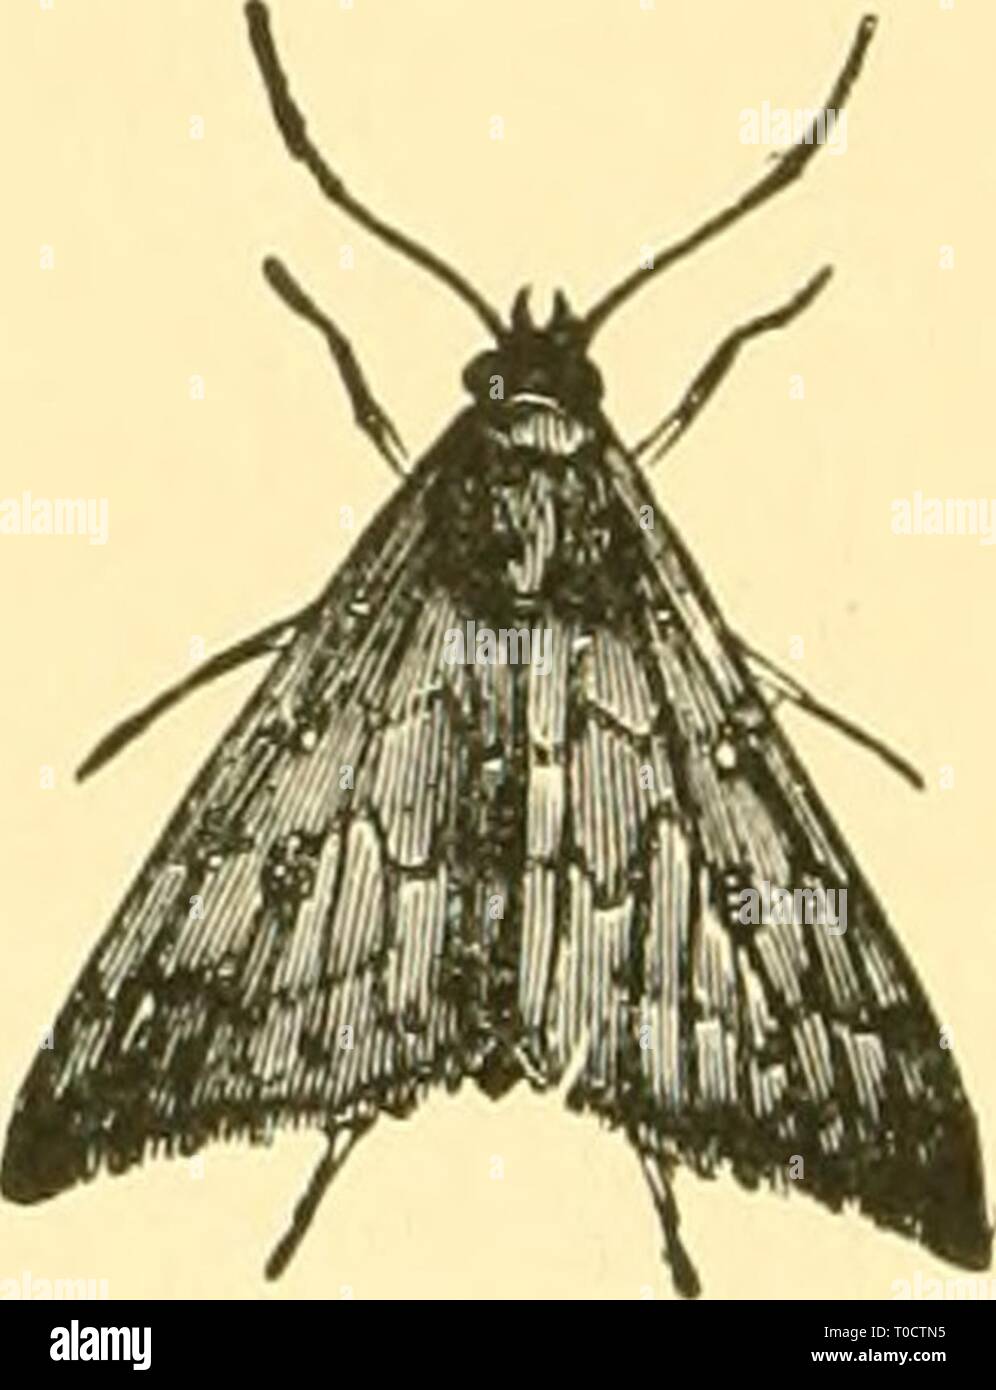 Economic entomology for the farmer Economic entomology for the farmer and fruit-grower economicentomolo01smit Year: 1906  Aletia argillacea at rest and with wings expanded. plants. It has been found that undiluted Paris green used in this way does not injure the foliage, while it is absolutely effective as against the larvae. Sometimes the pole is made long enough to hold four sacks, so that four rows are dusted at one time. This is exceedingly simple and practical, and has the advantage of re- quiring no expensive outfit. We have belonging to this series of semiloopers a number of moths belon Stock Photo